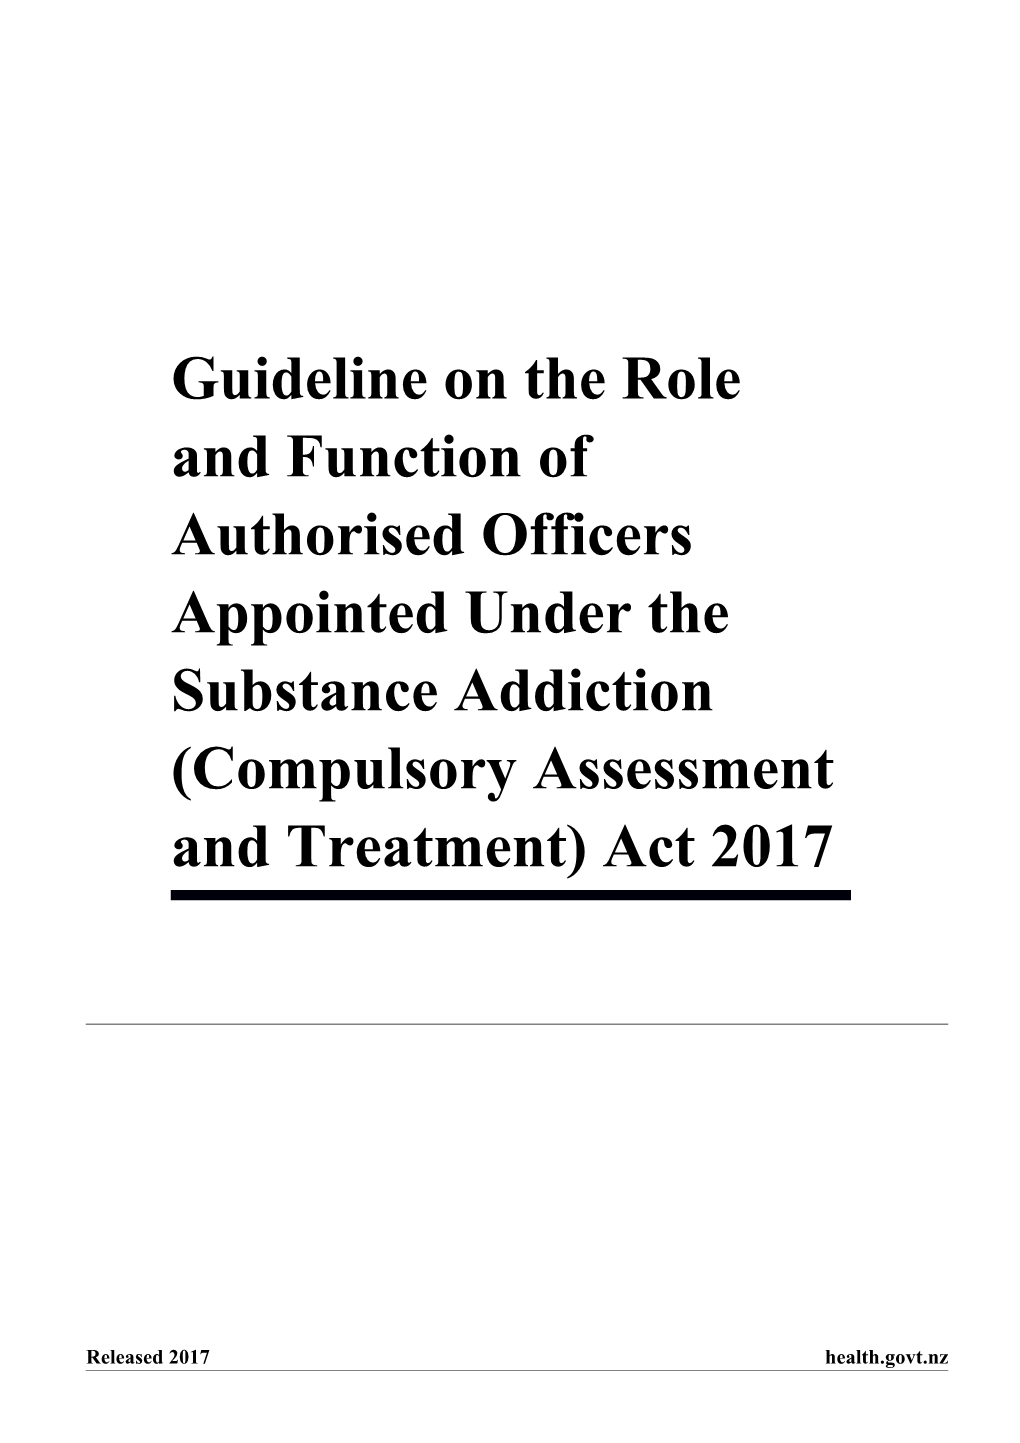 Guideline on the Role and Function of Authorised Officers Appointed Under the Substance